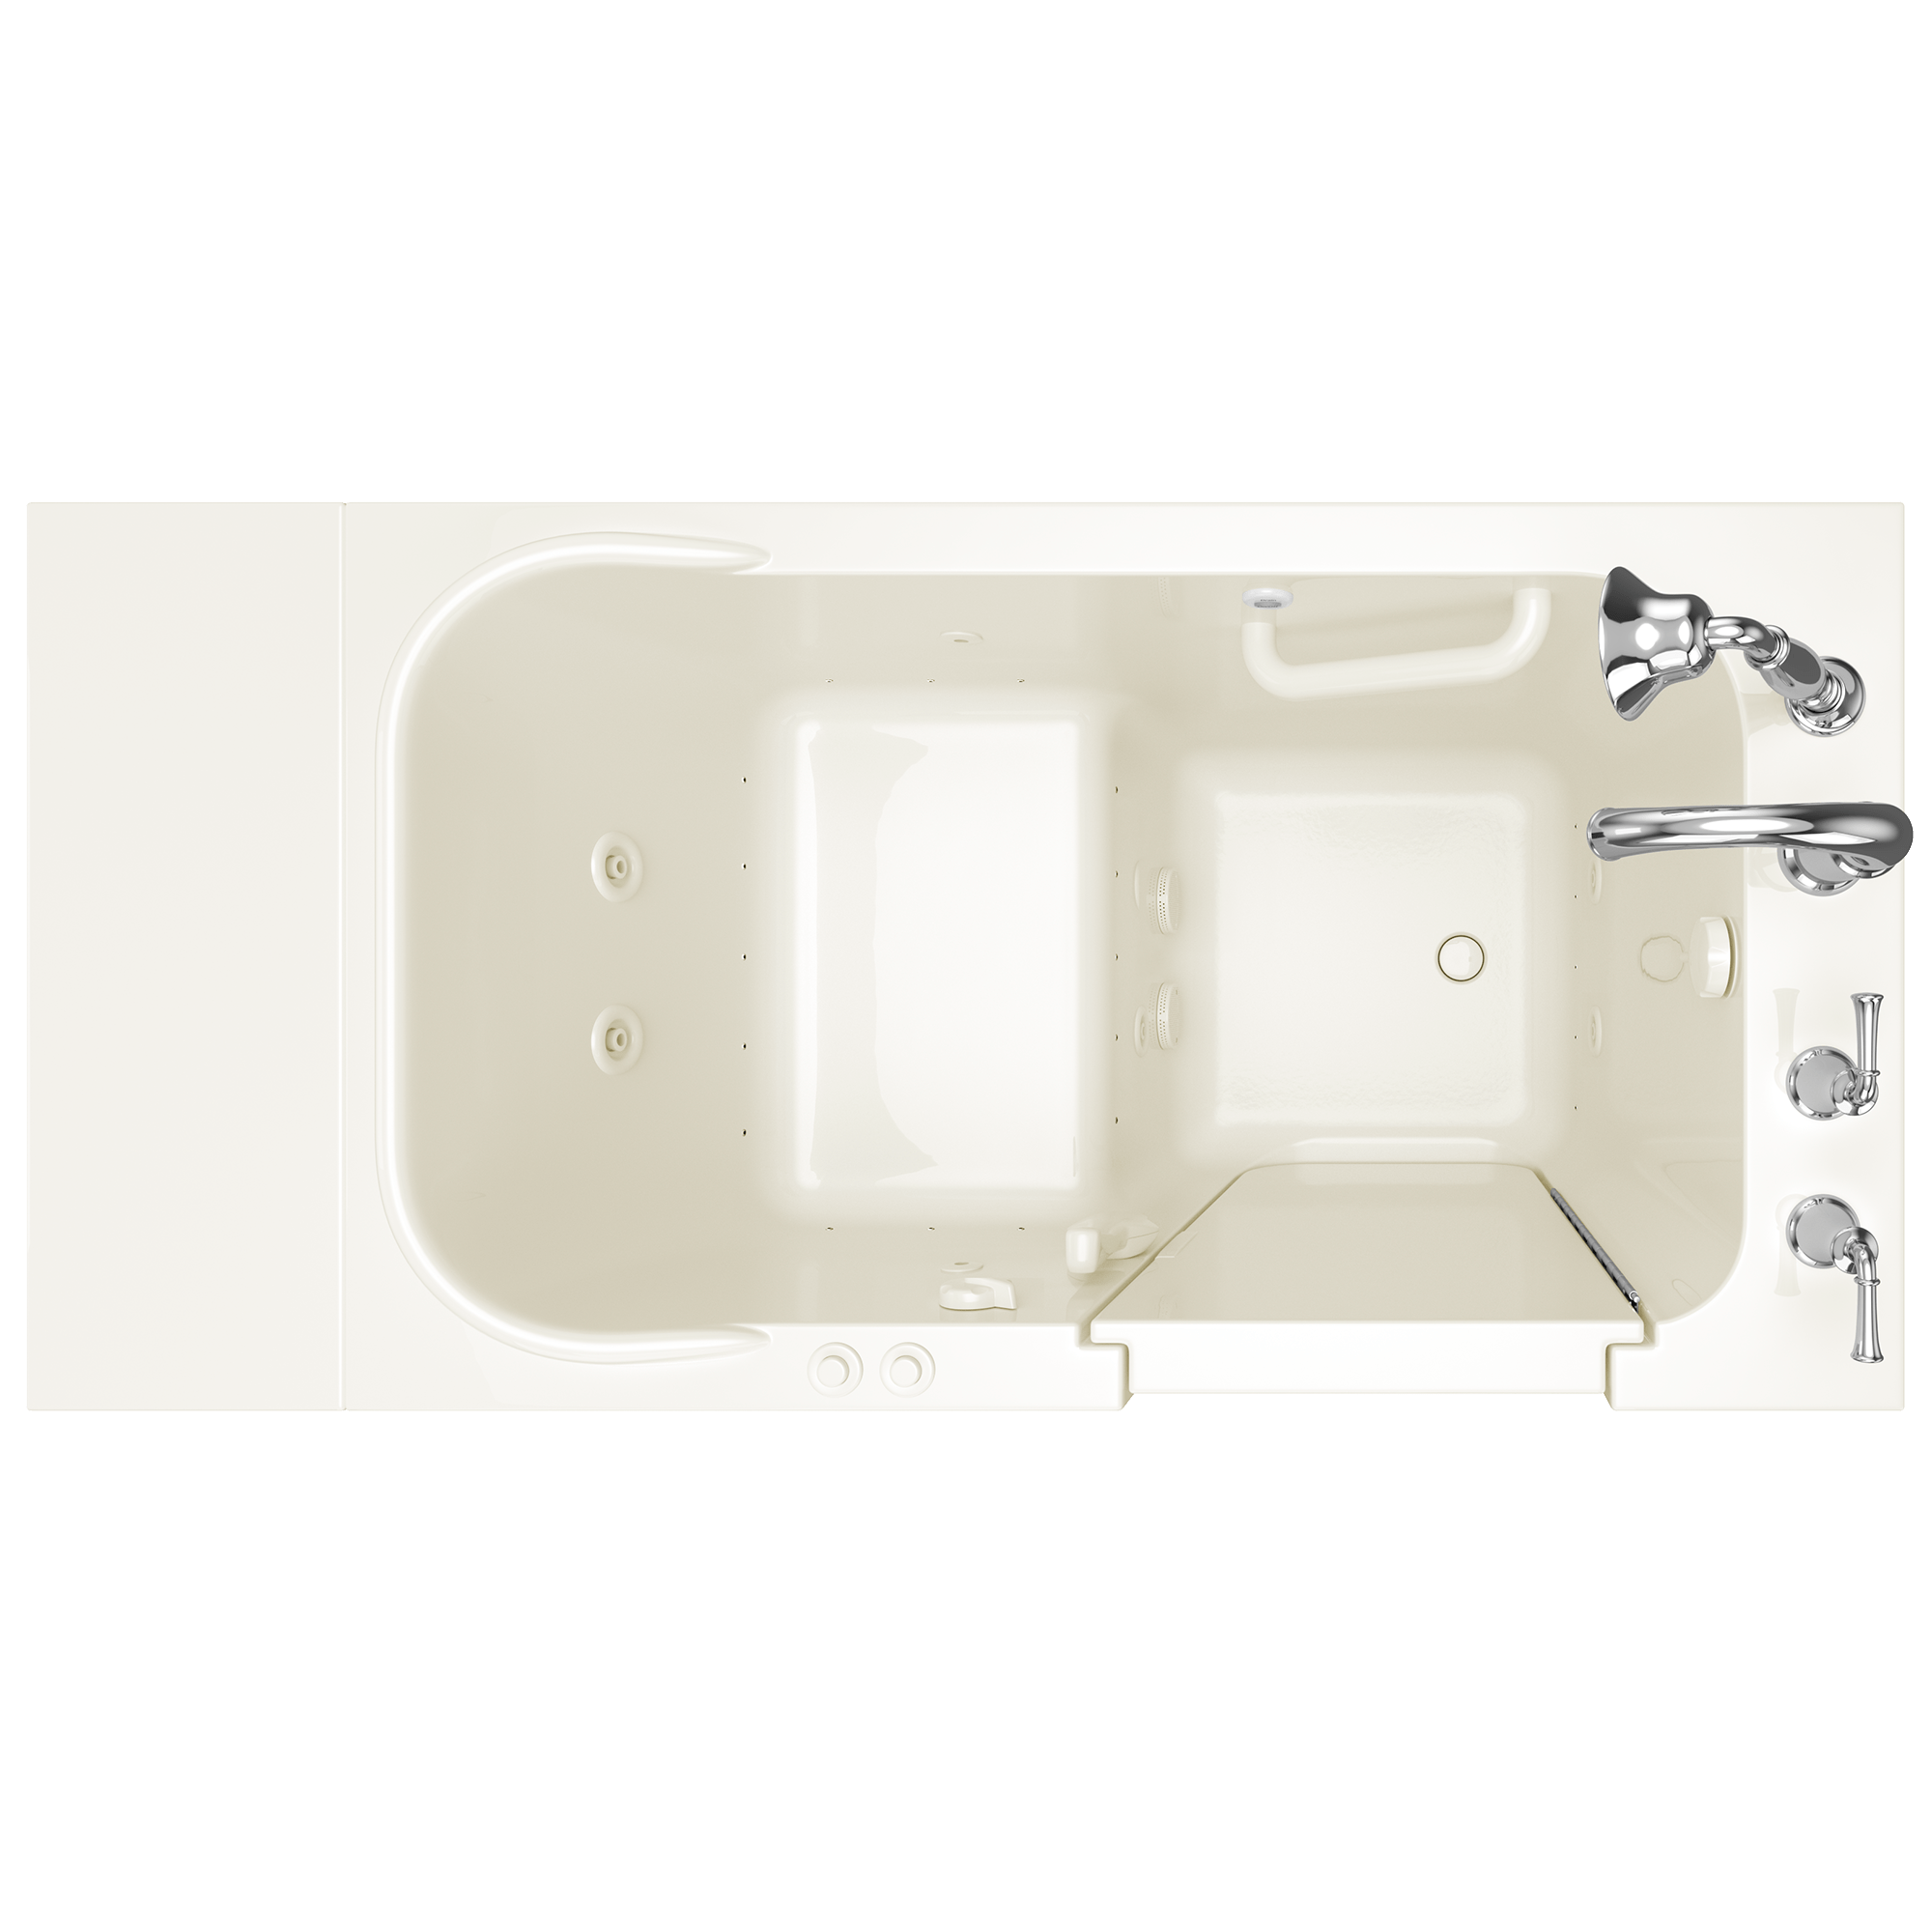 Gelcoat Value Series 28 x 48-Inch Walk-in Tub With Combination Air Spa and Whirlpool Systems - Right-Hand Drain With Faucet